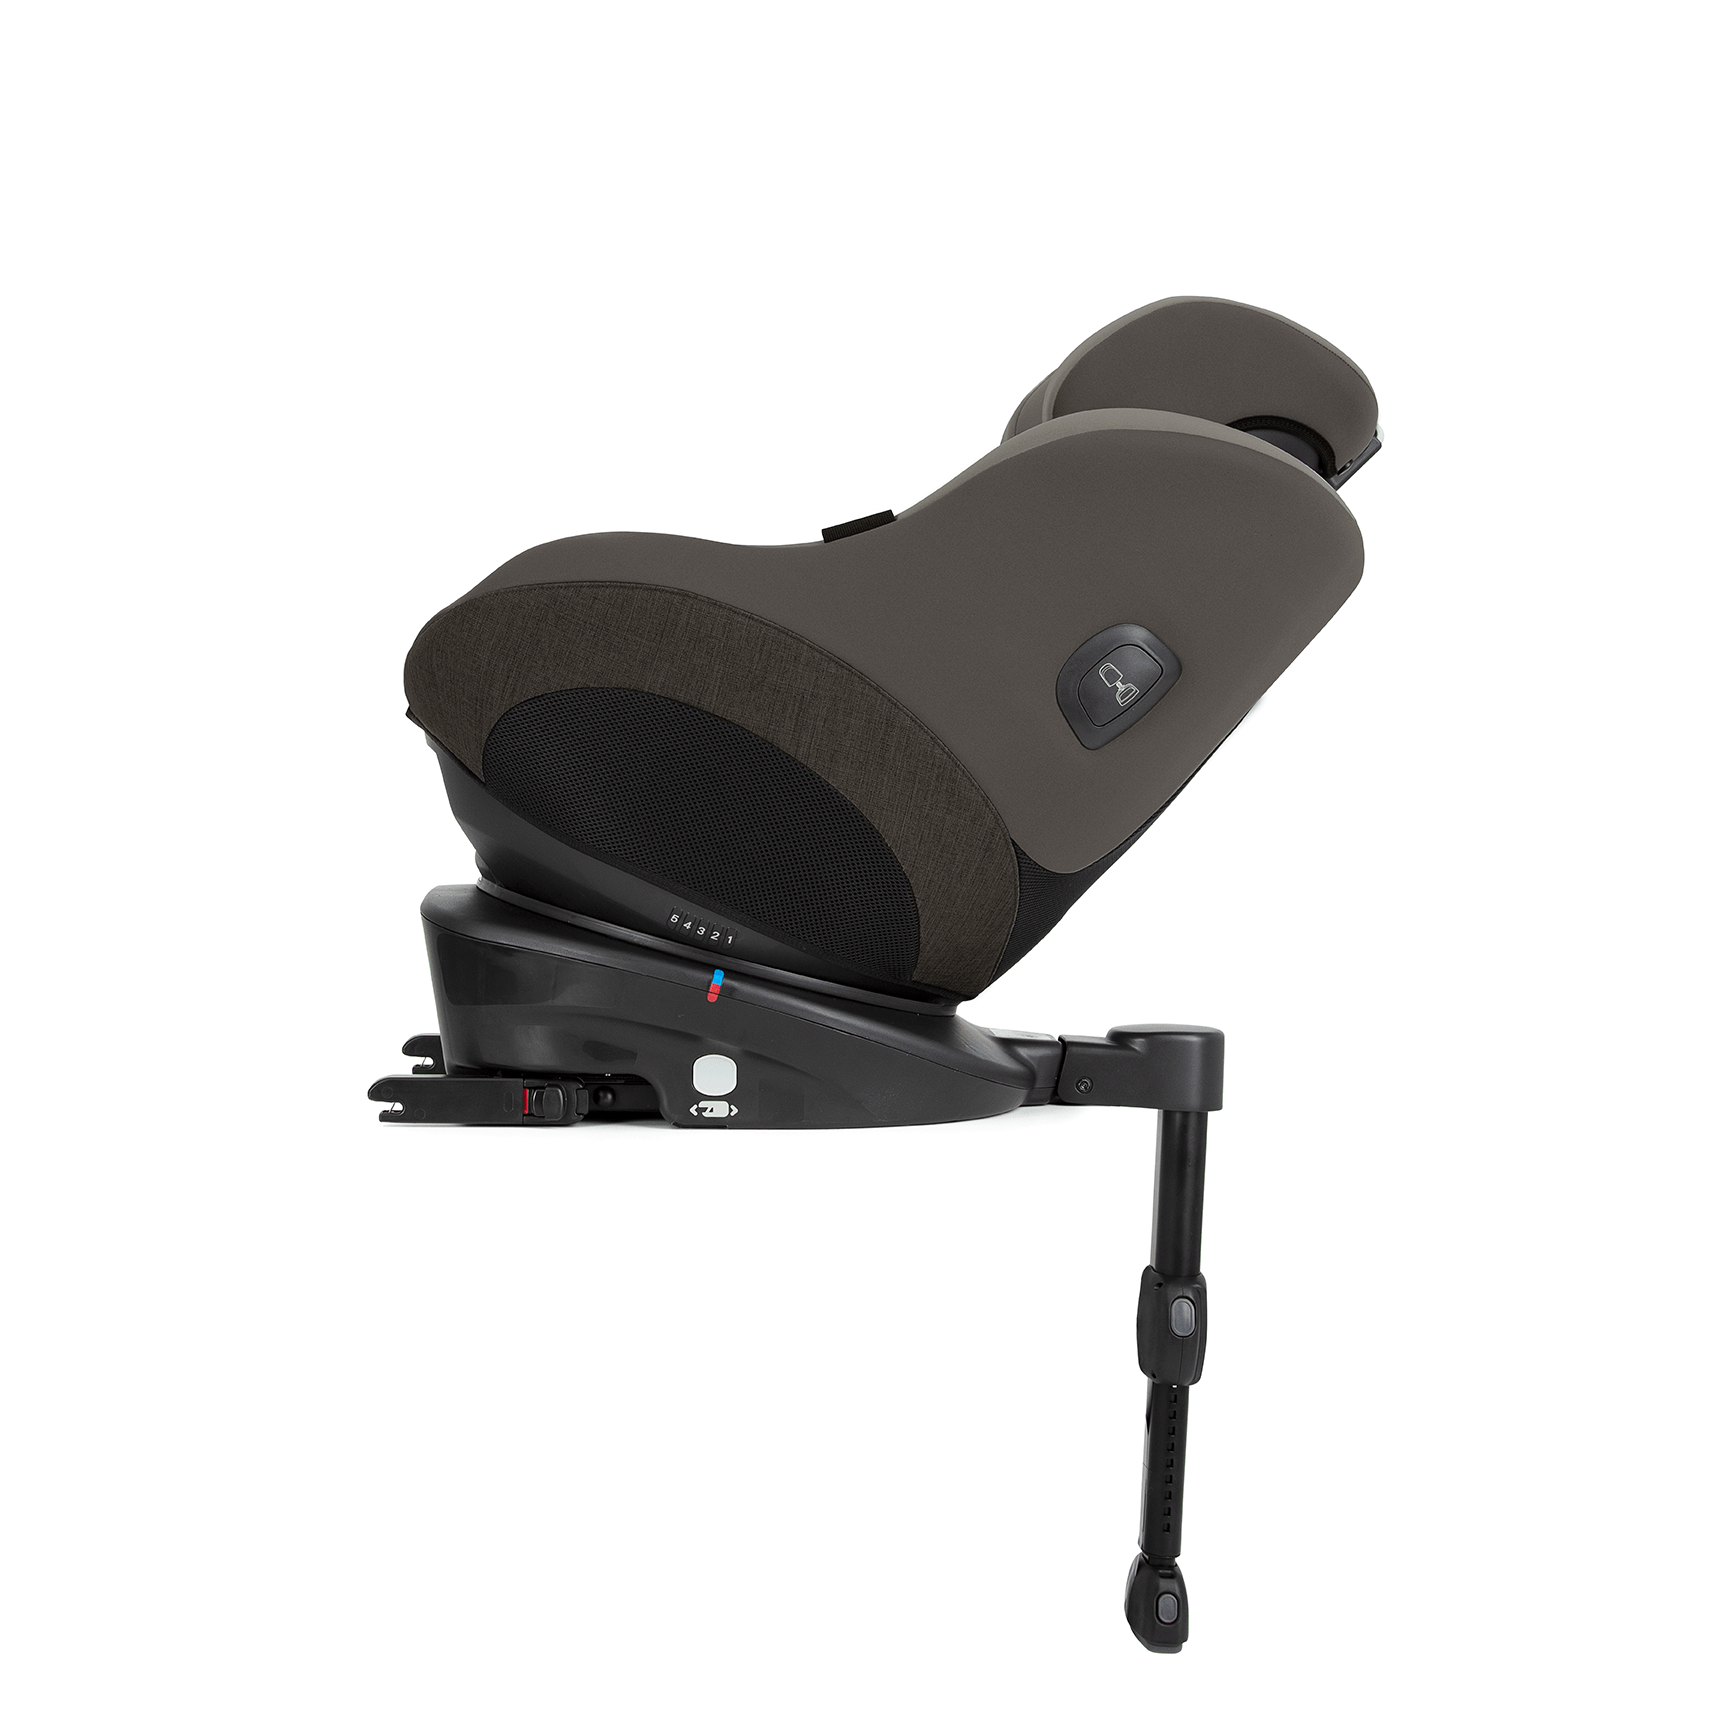 Joie Spin 360 GTi in Cobblestone Car Seats C2116AACBL000 5056080612683